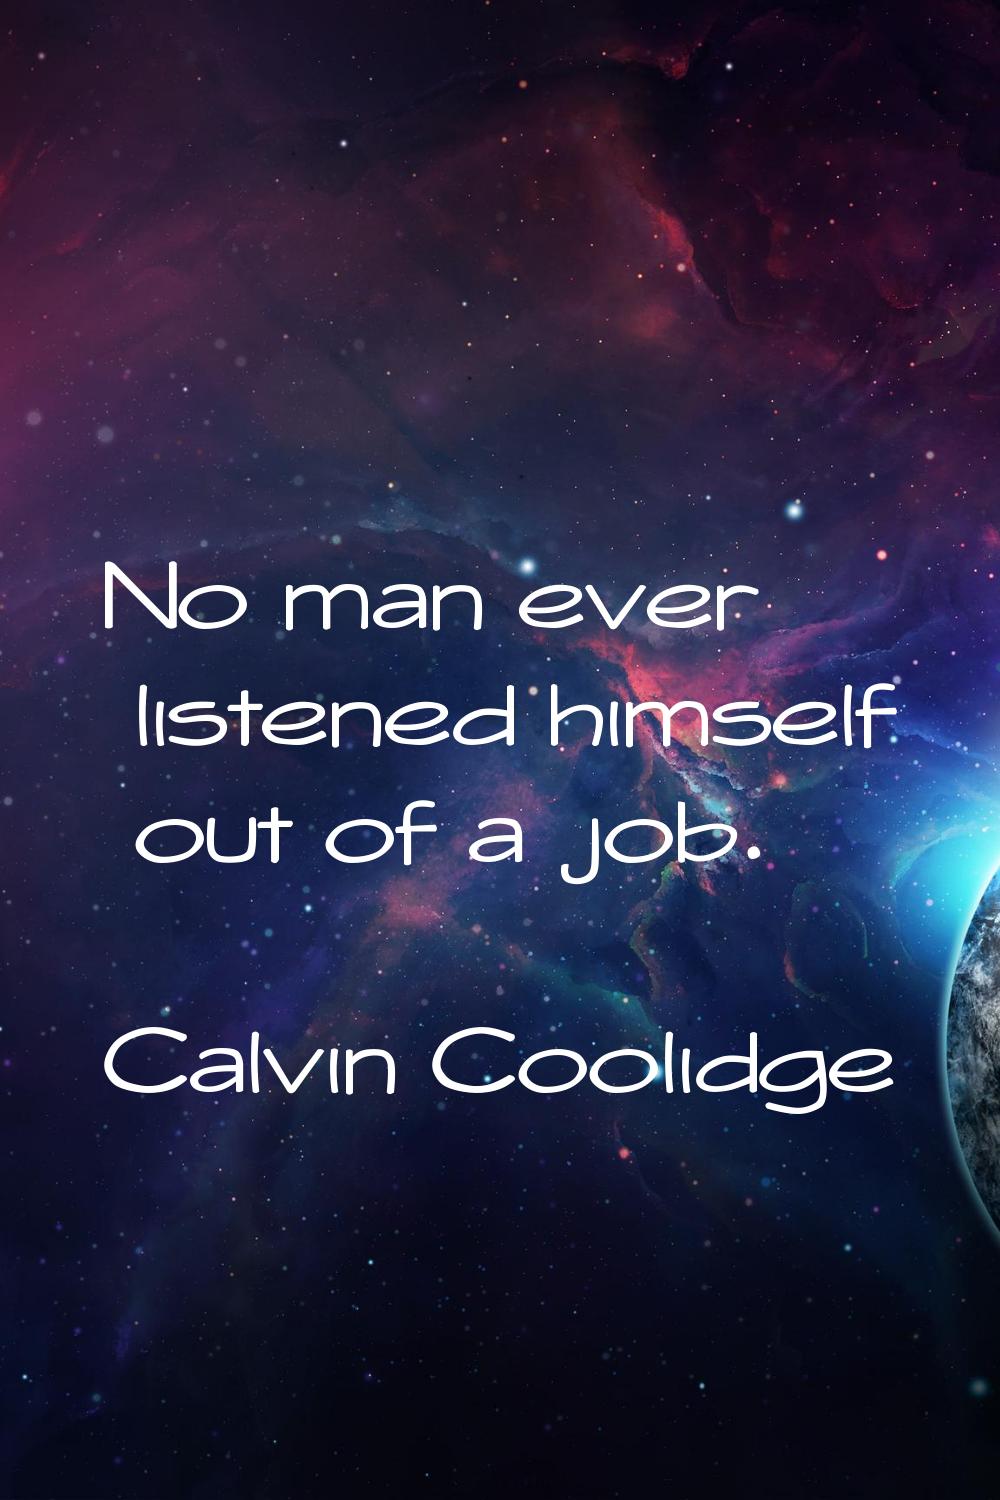 No man ever listened himself out of a job.